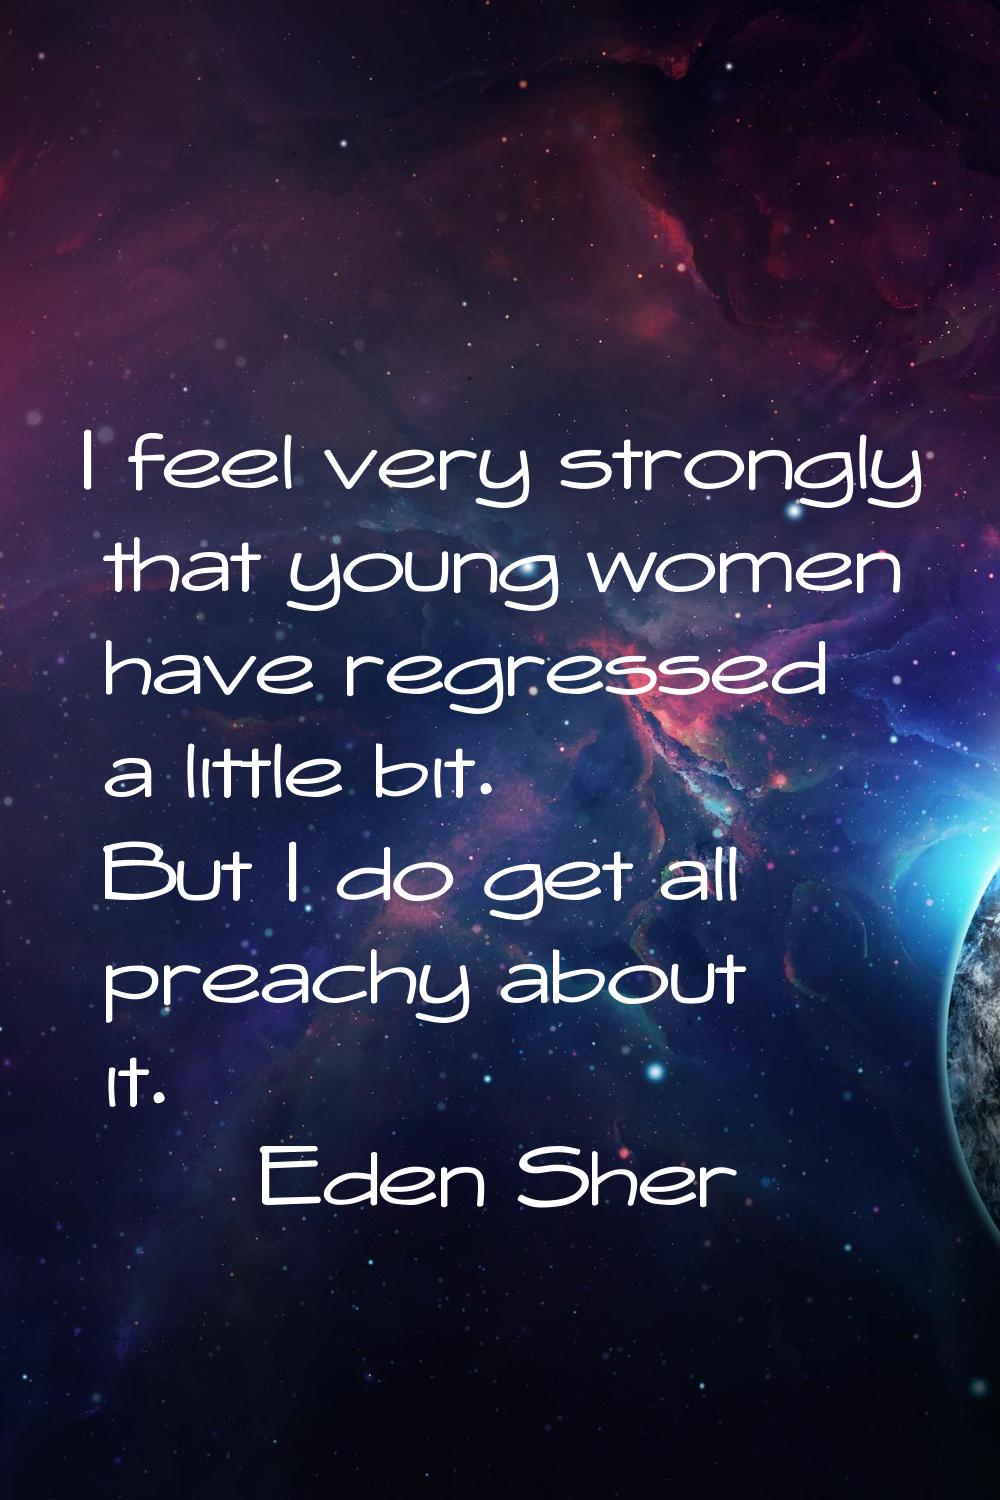 I feel very strongly that young women have regressed a little bit. But I do get all preachy about i